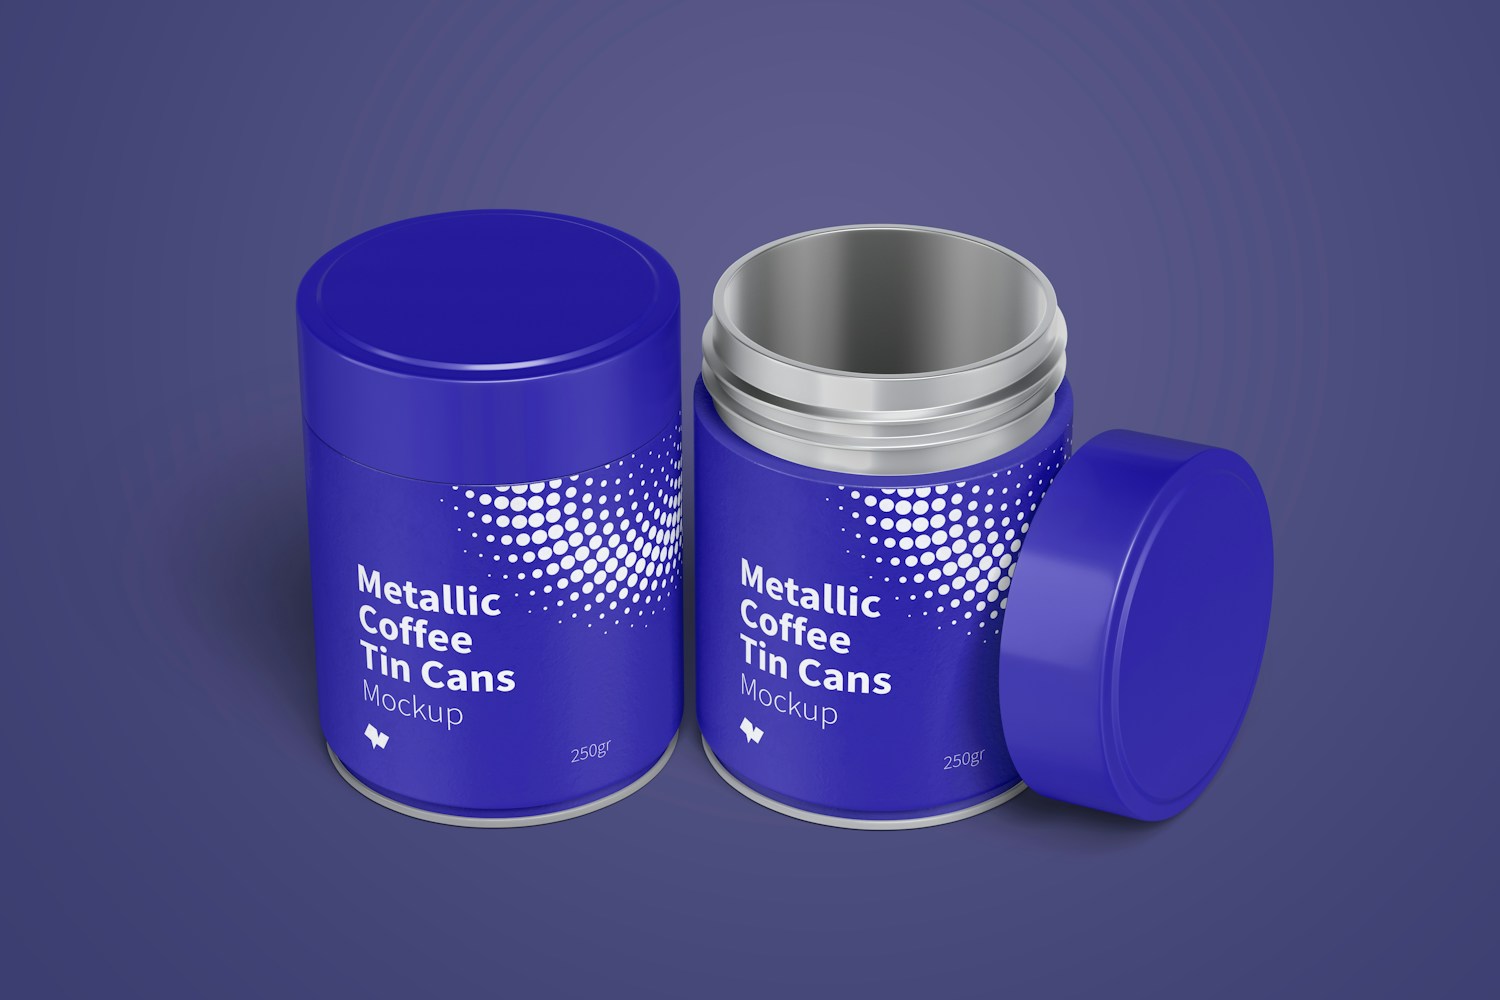 Metallic Coffee Tin Cans with Plastic Lids Mockup, Opened and Closed